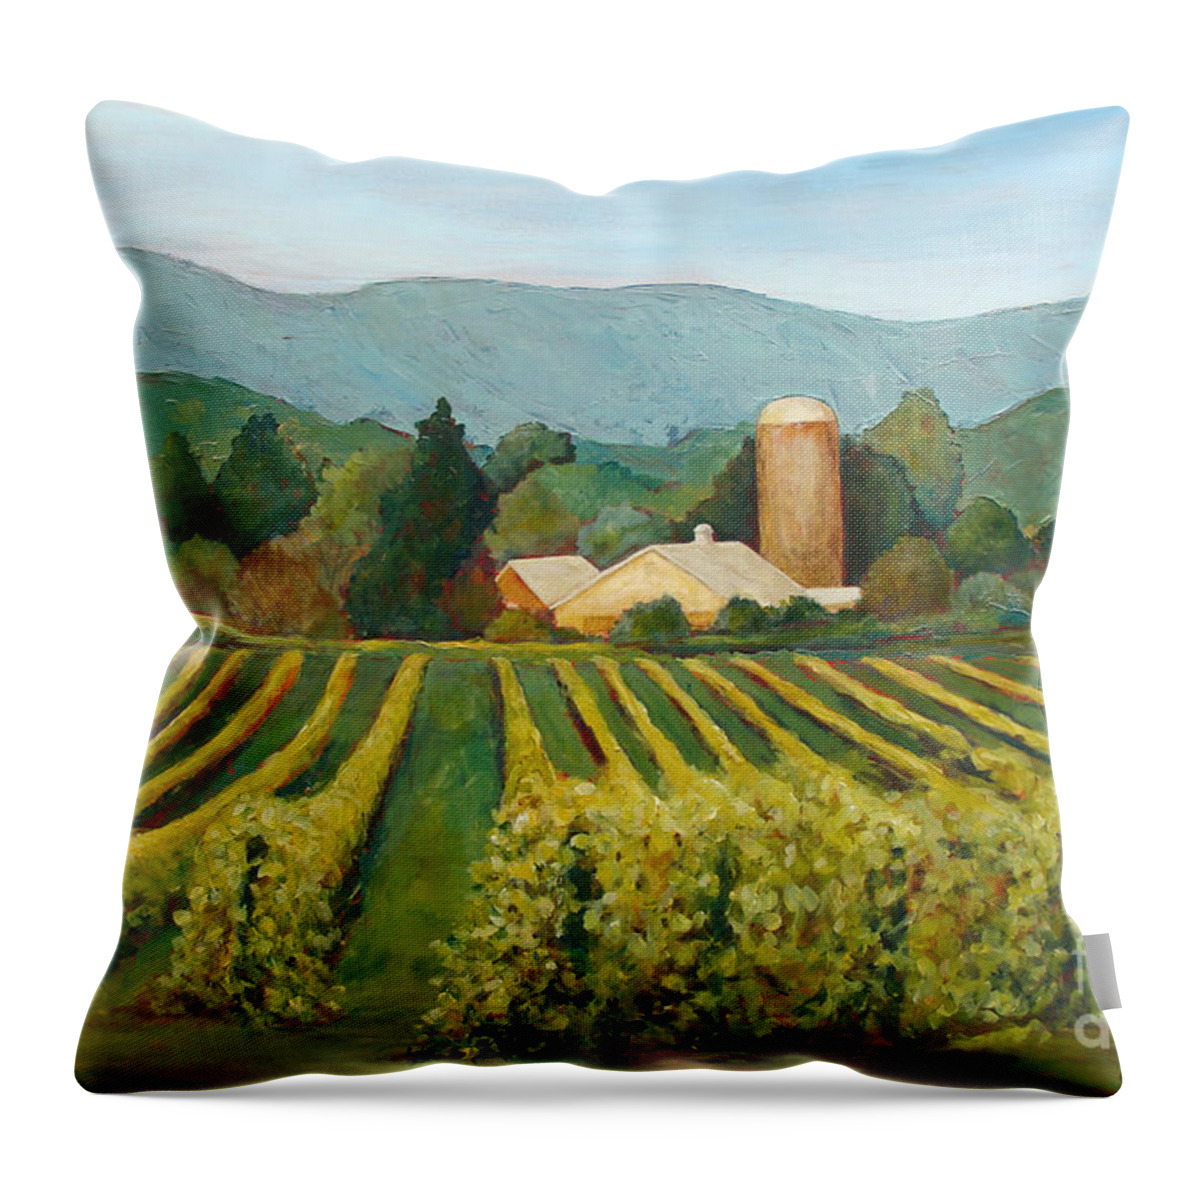 Landscape Throw Pillow featuring the painting Raspberry Rows by Phyllis Howard